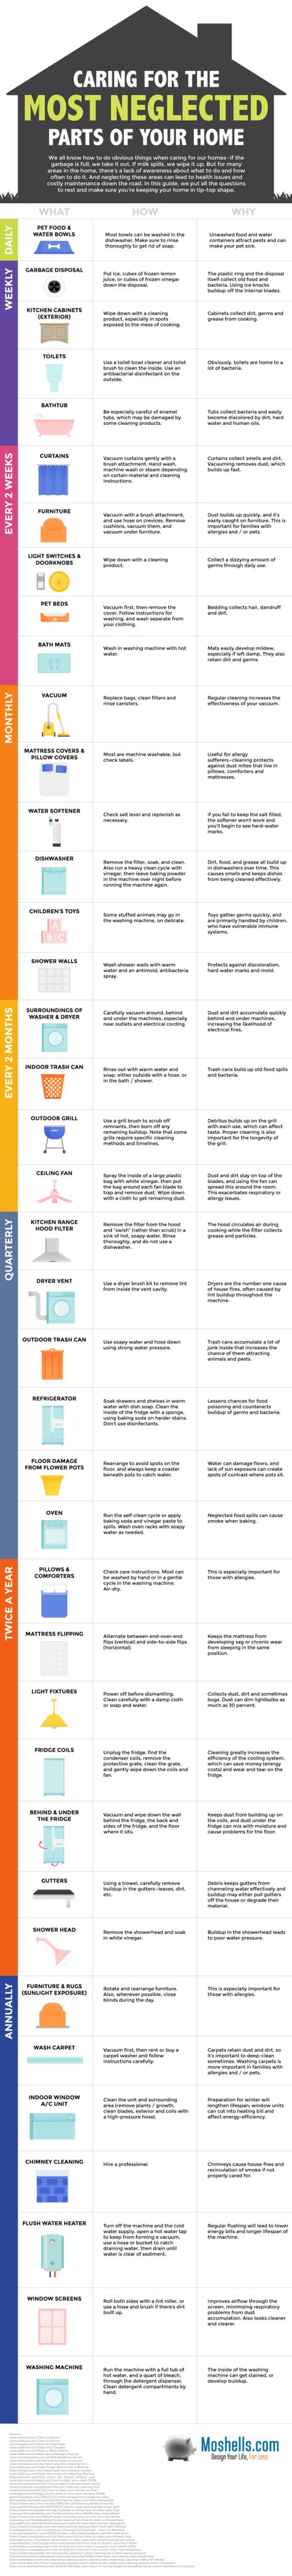 Cleaning Hacks and Tips for the new Spring Cleaning Season – cleaning Schedule, printables and infographics. Your household cleaning will be a fun experiment with these surprising cleaning recipes and tricks! Household Cleaning Tips, Life Hacks, Organisation, Cleaning Schedule, Helpful Hints, Cleaning Checklist, Household, Household Hacks, Cleanliness